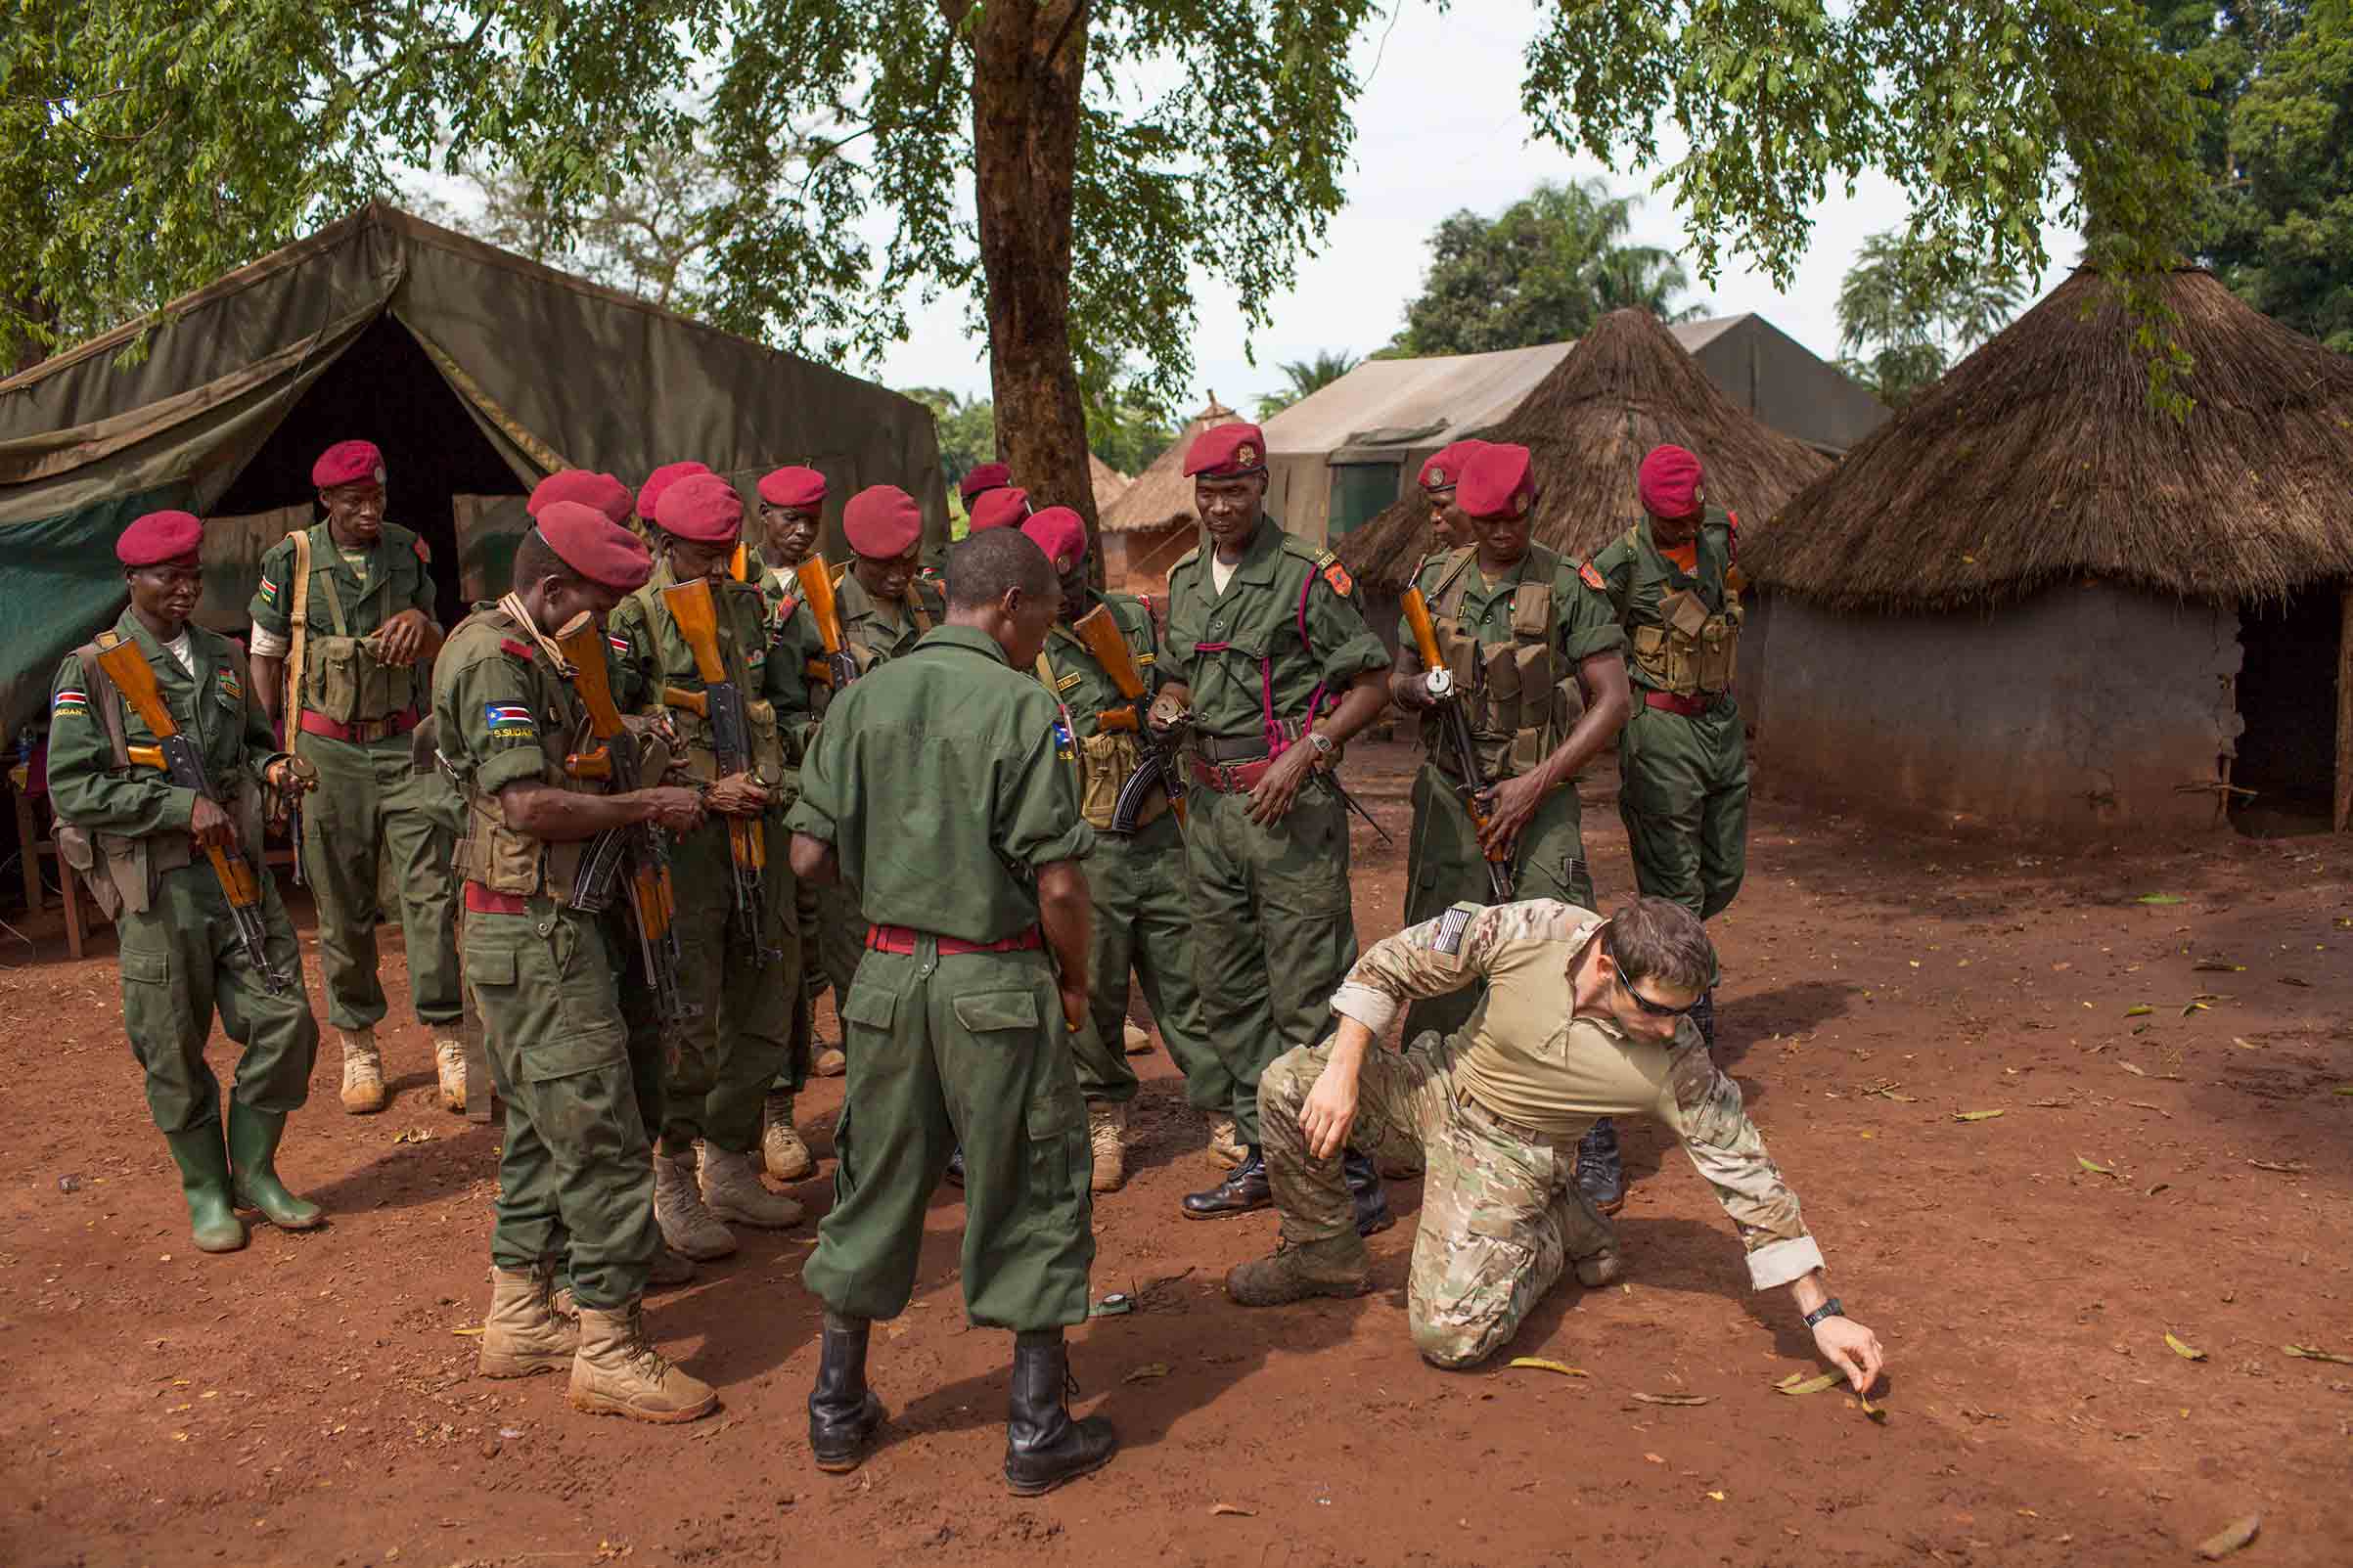 American Green Berets teach navigation techniques to soldiers from the Sudan People’s Liberation Army near a U.S. base in Nzara, South Sudan, that coordinates intelligence operations (Michael Christopher Brown—Magnum)